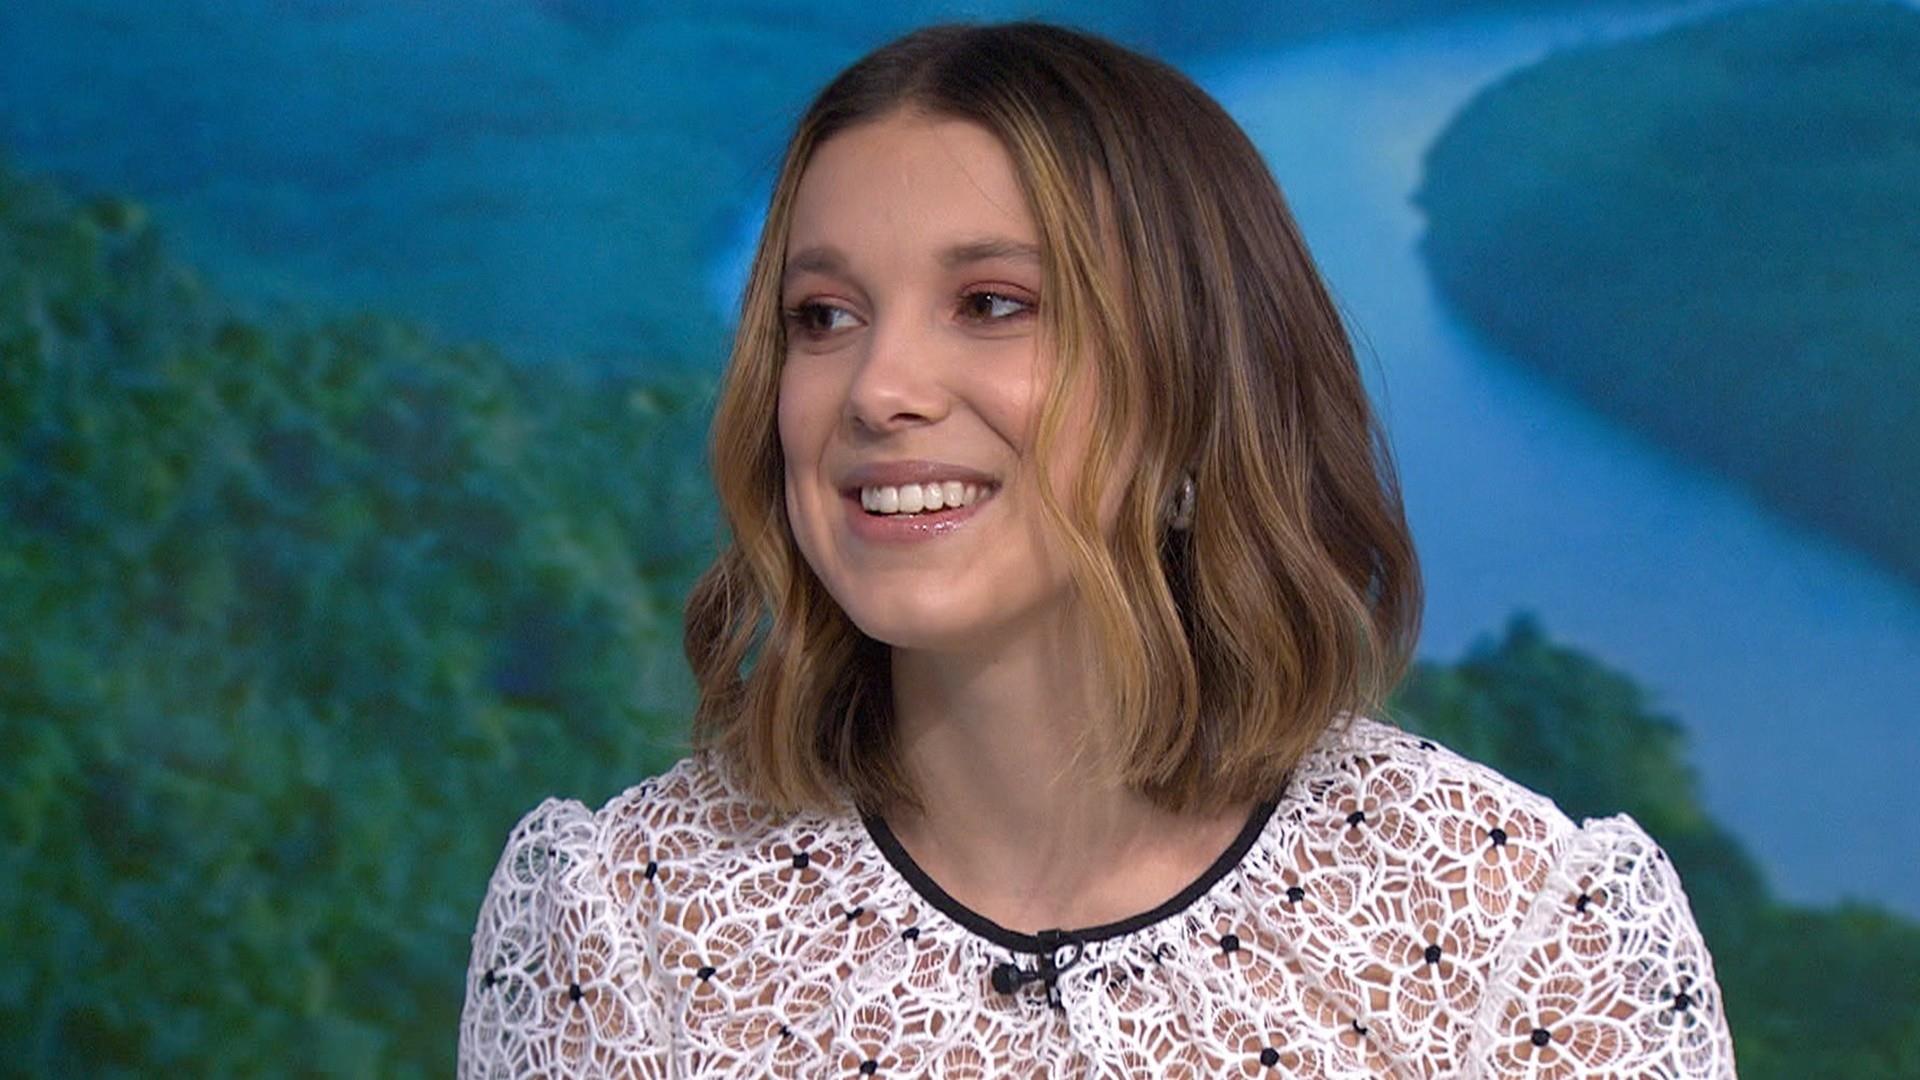 Millie Bobby Brown is barely recognizable in picture with long, curly hair